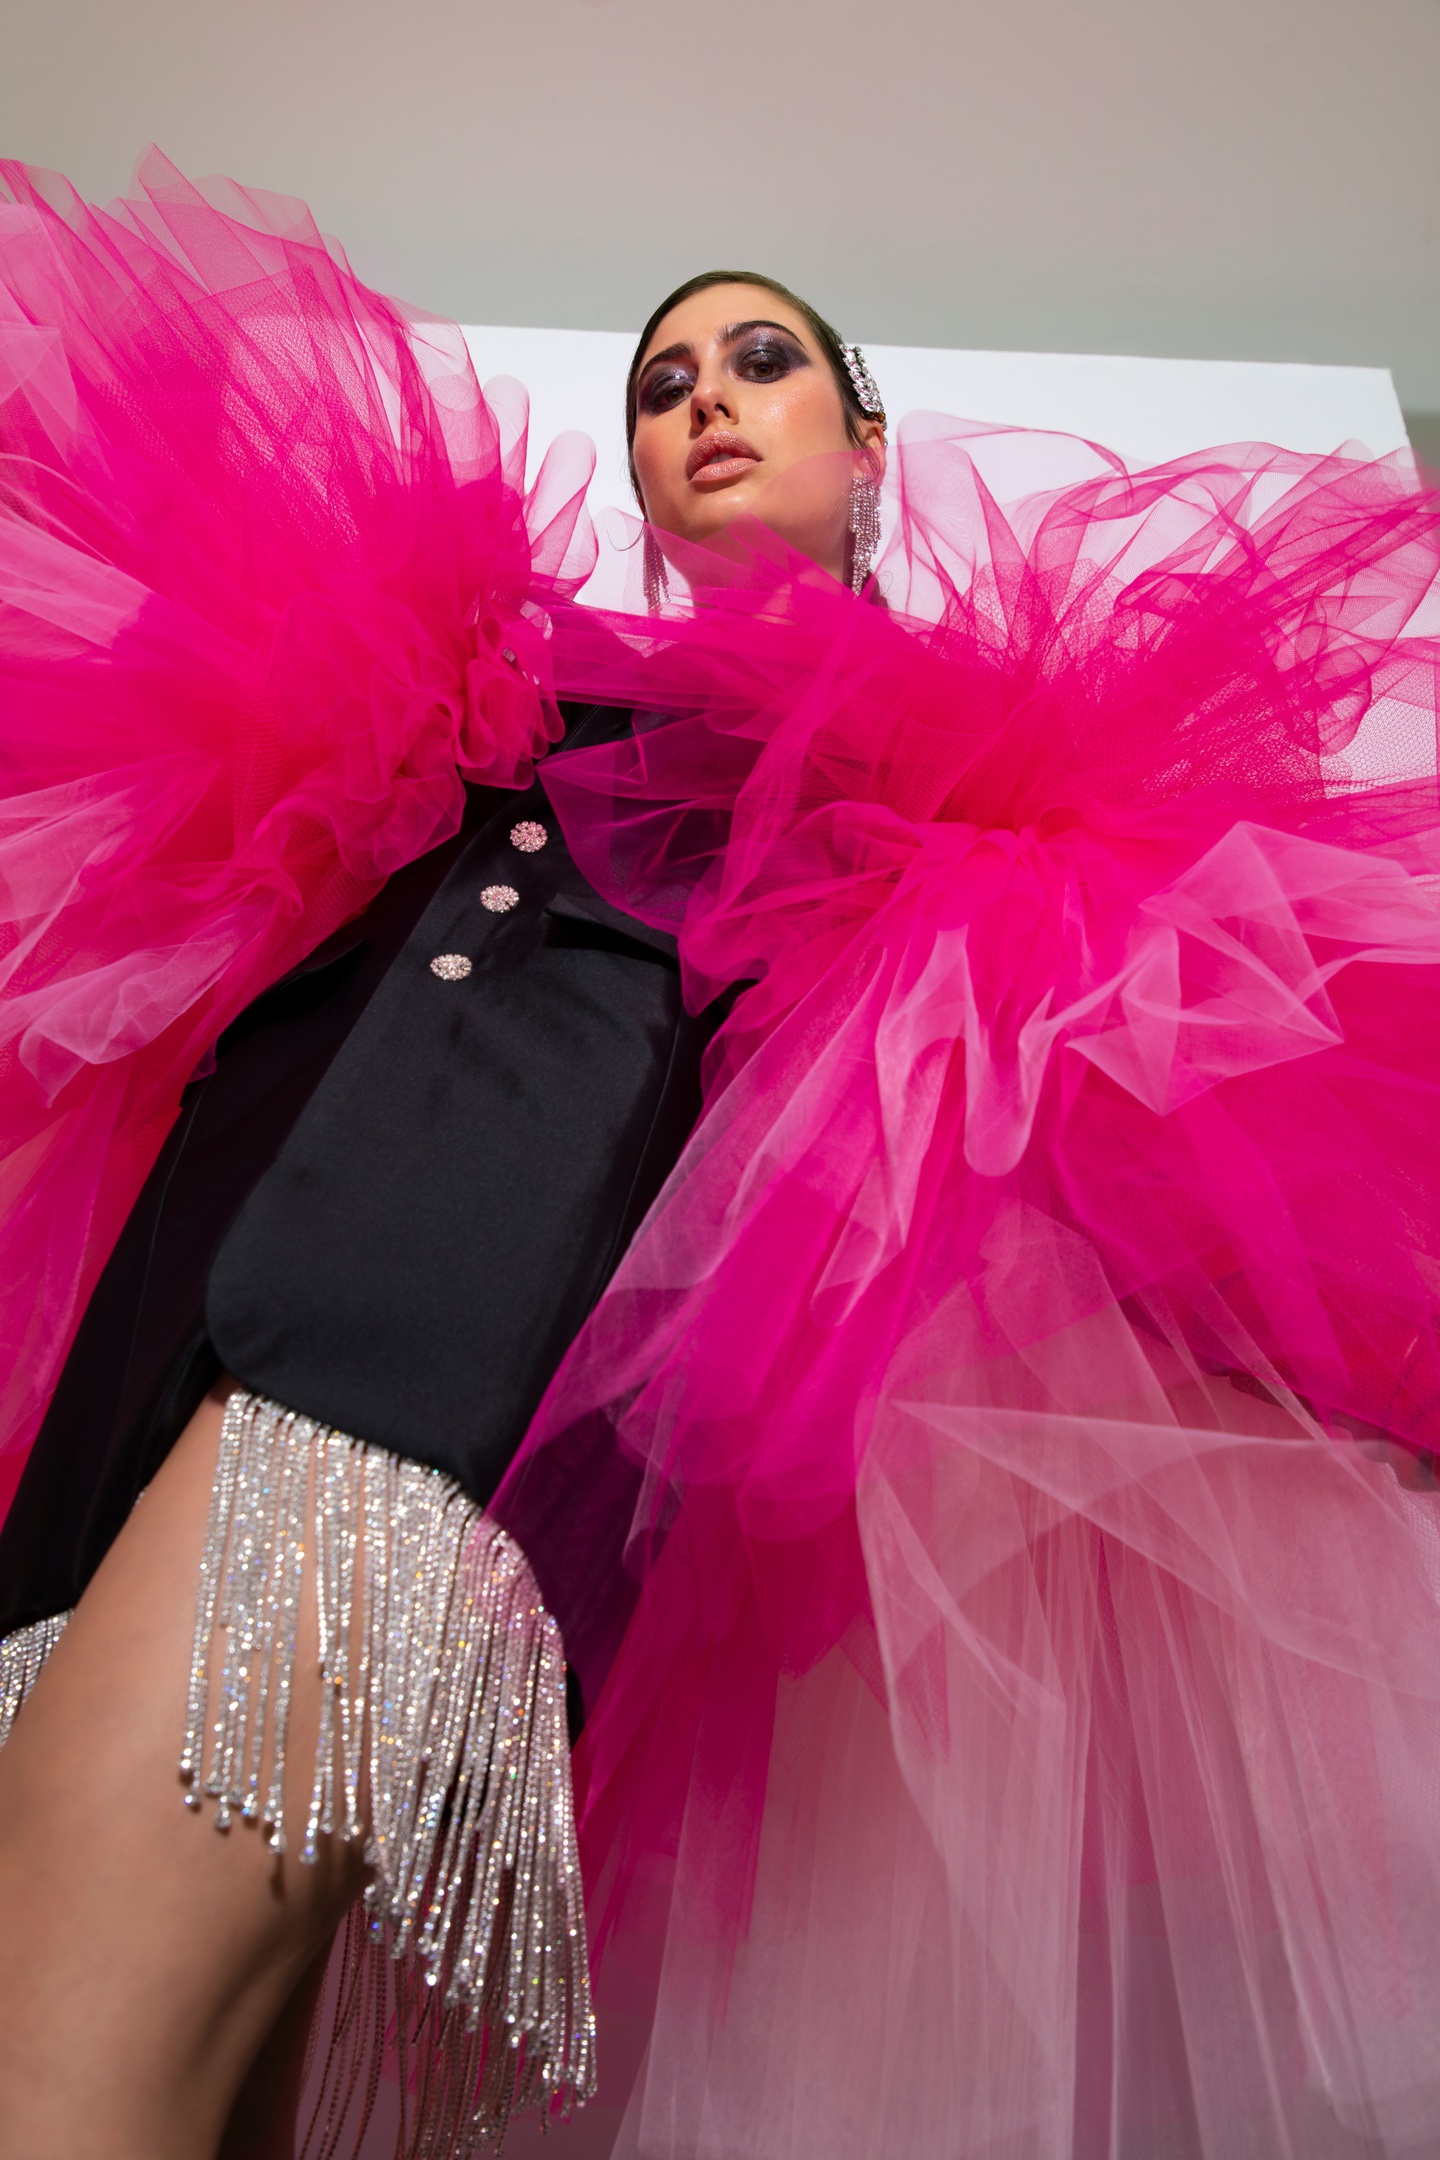 Model photographed from a low angle wearing a black satin minidress with a rhinestone tassel fringe. The dress's sleeves are voluminous ruffs of magenta tulle, each larger than the minidress.